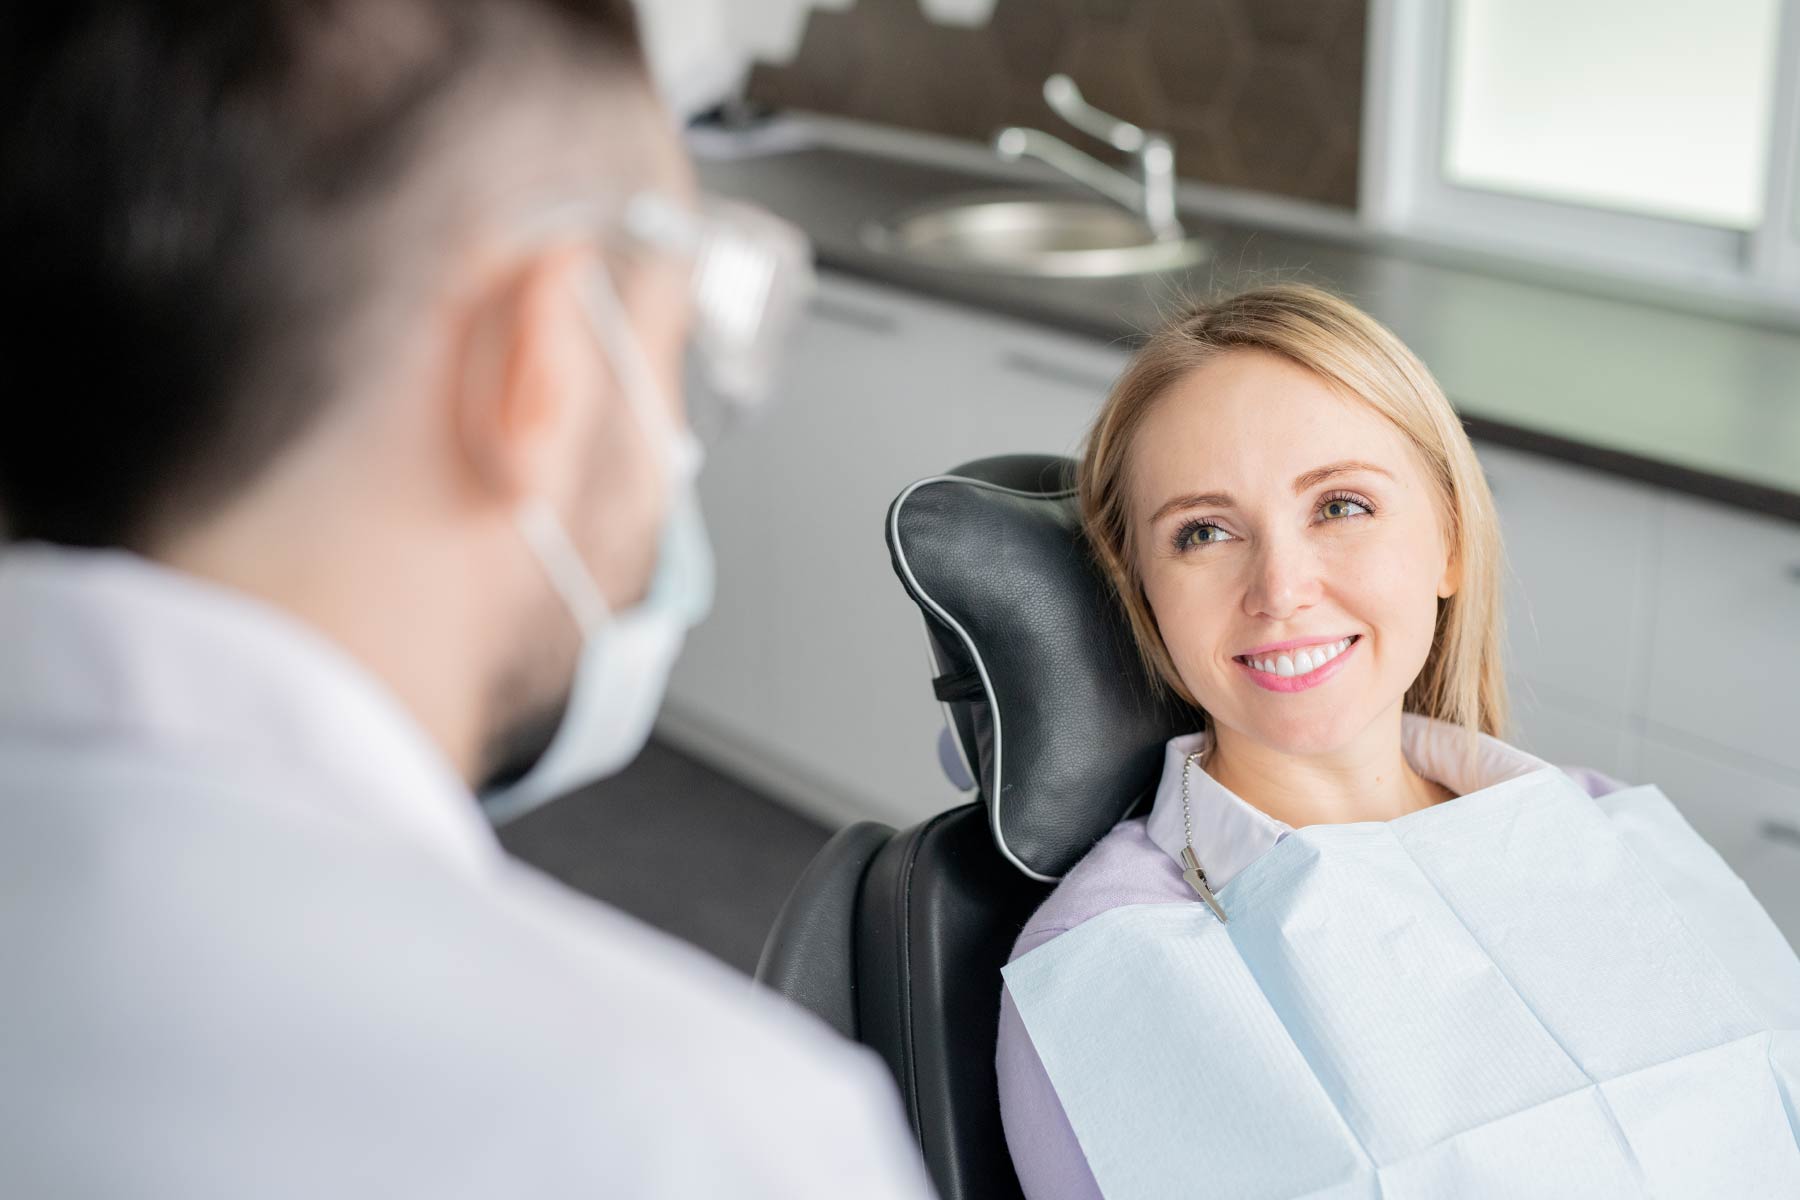 Woman smiling in dentist chair